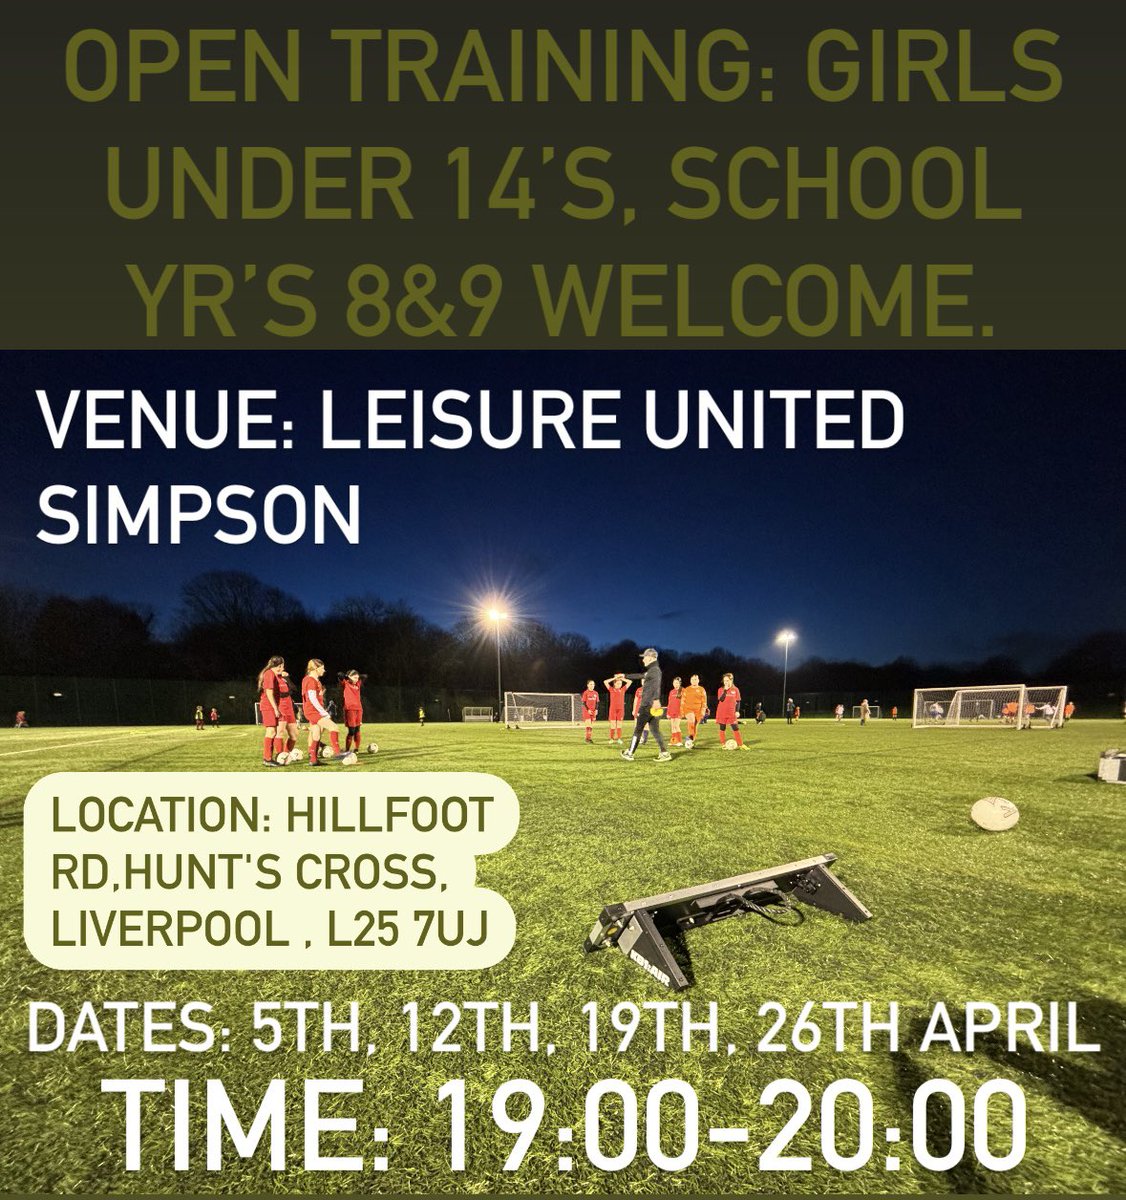 GIRL FOOTBALLERS WELCOME: DETAILS ON POST: MESSAGE FOR FURTHER INFORMATION